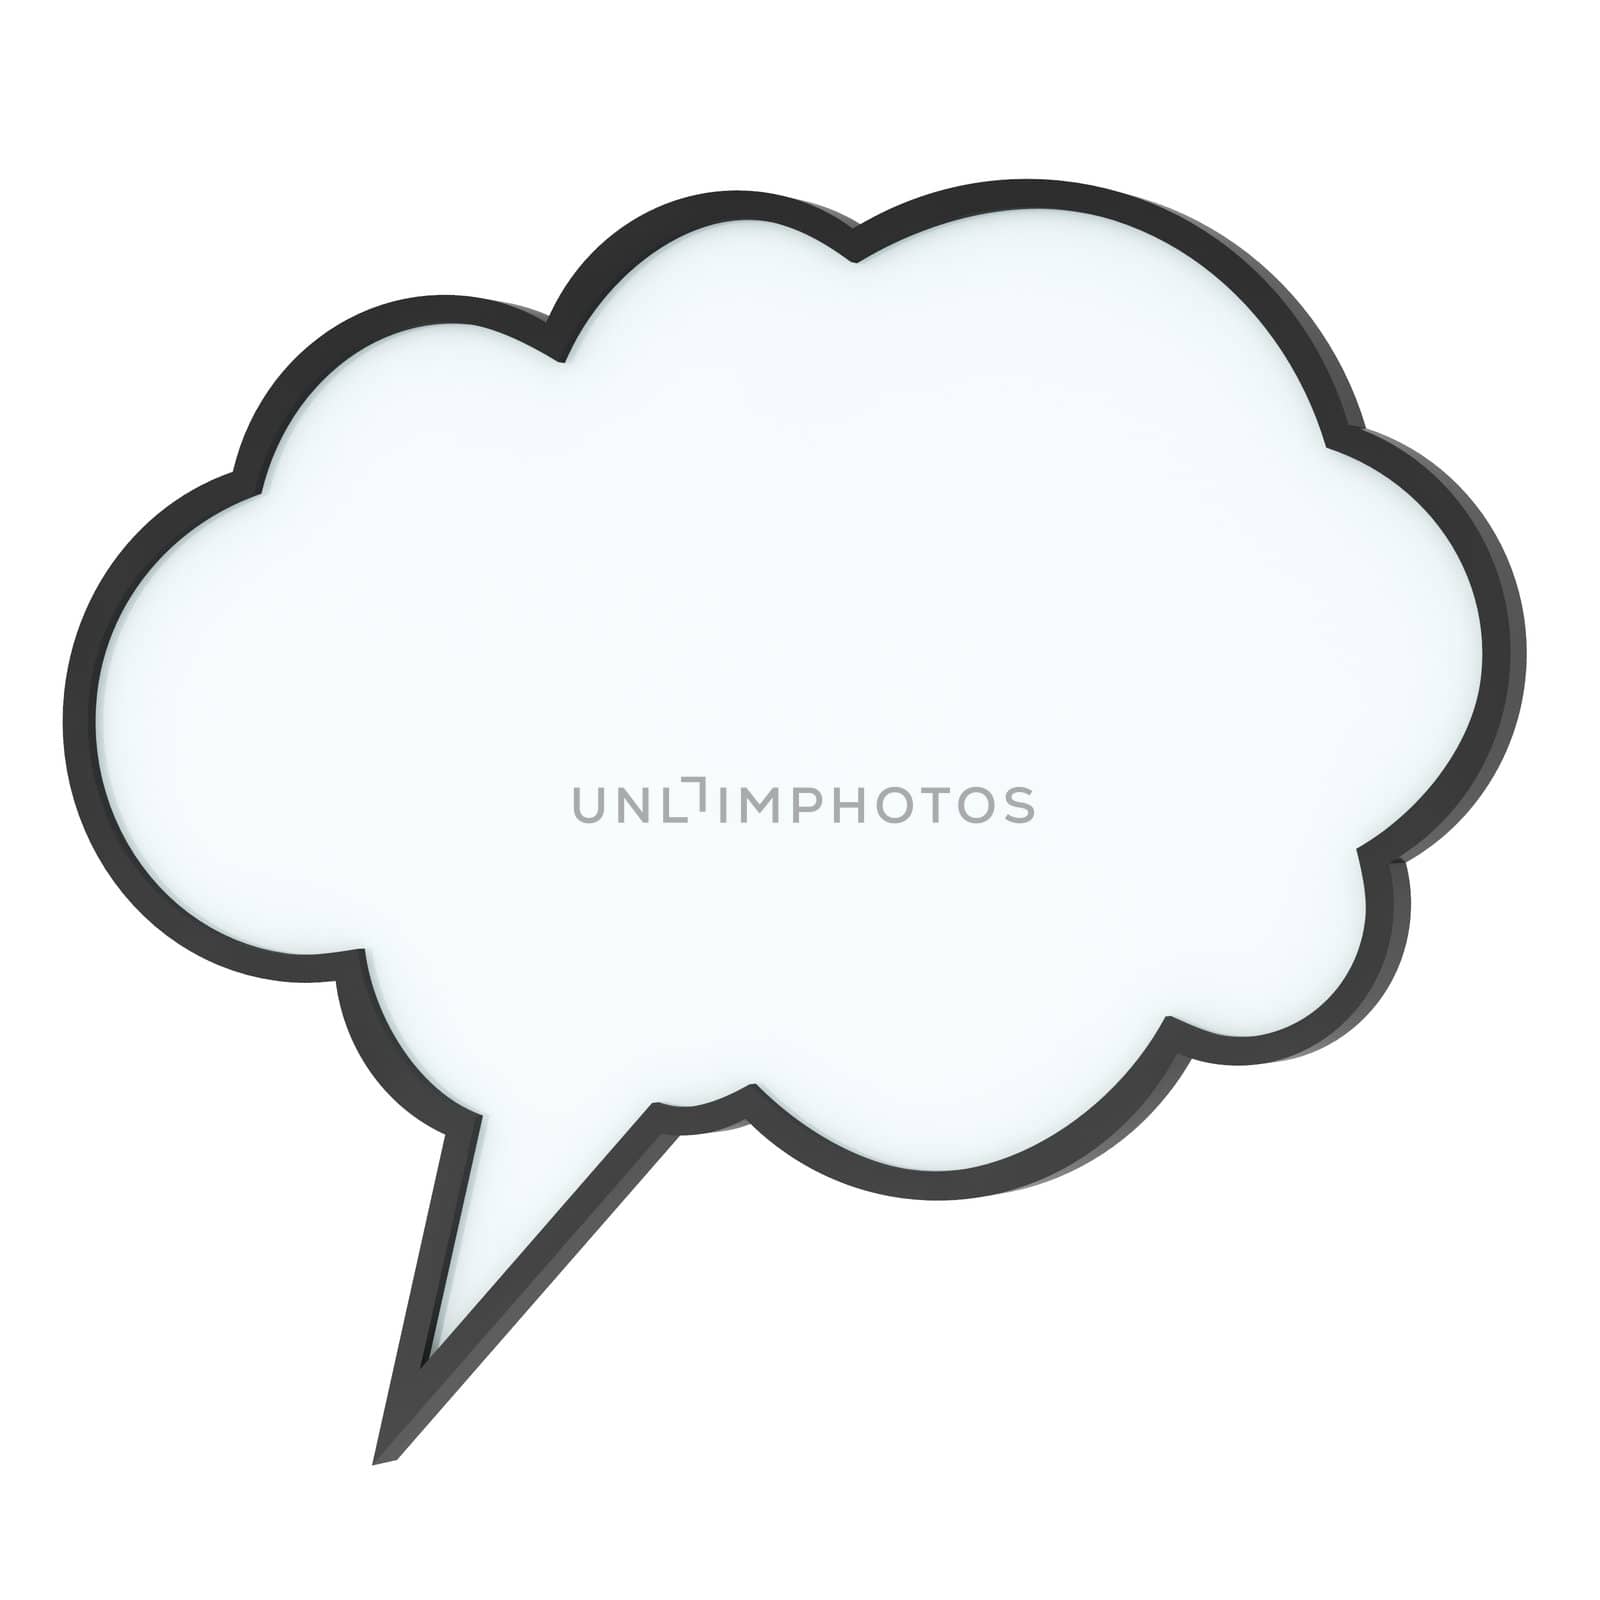 Empty high-quality speech bubble or tag cloud by maxkabakov